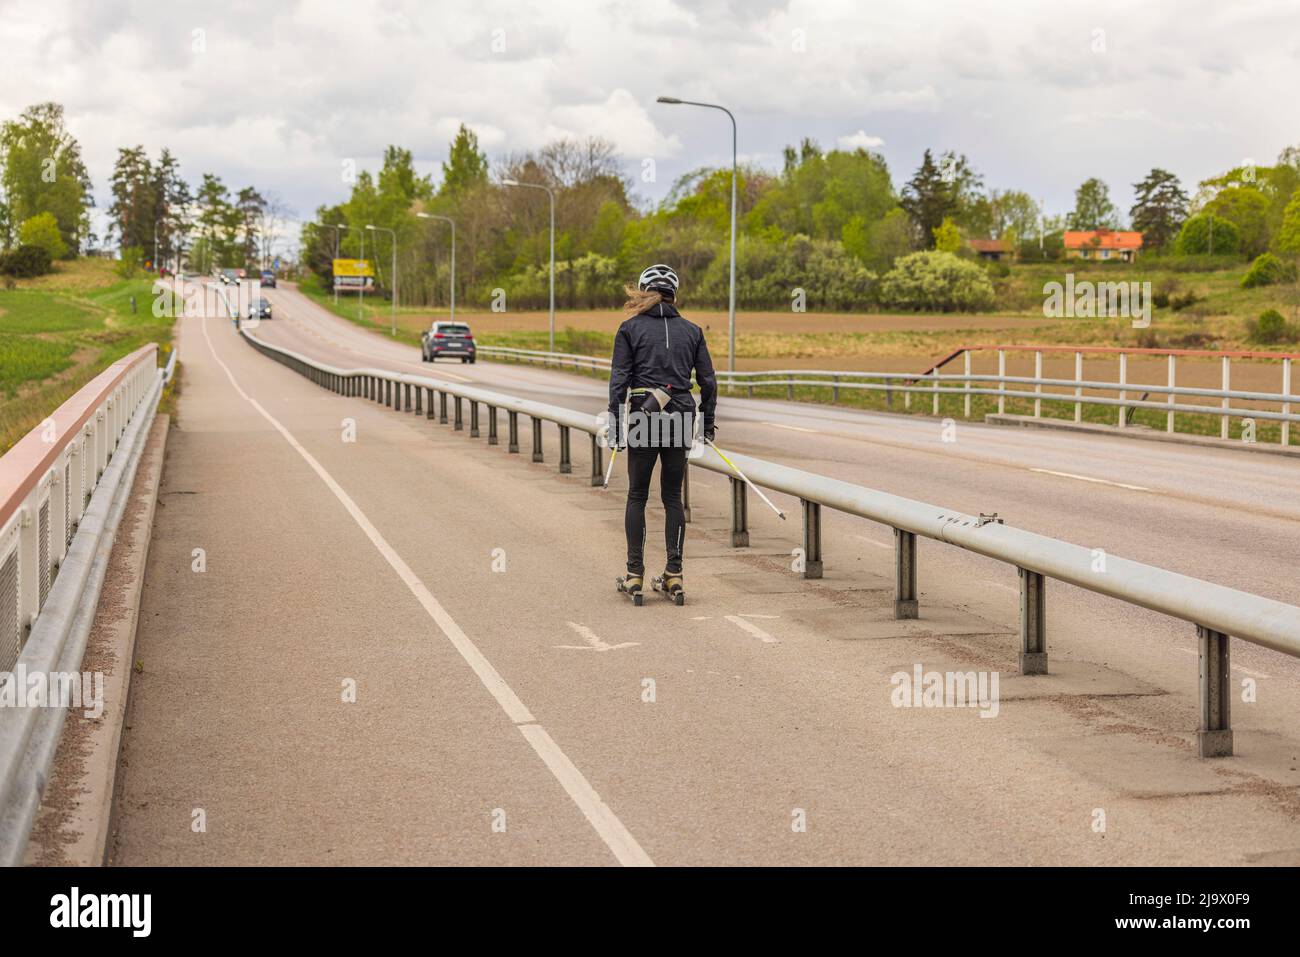 Man trains on roller skis on dedicated bike path on summer day. Concept of sports, healthy lifestyle. Sweden. Stock Photo